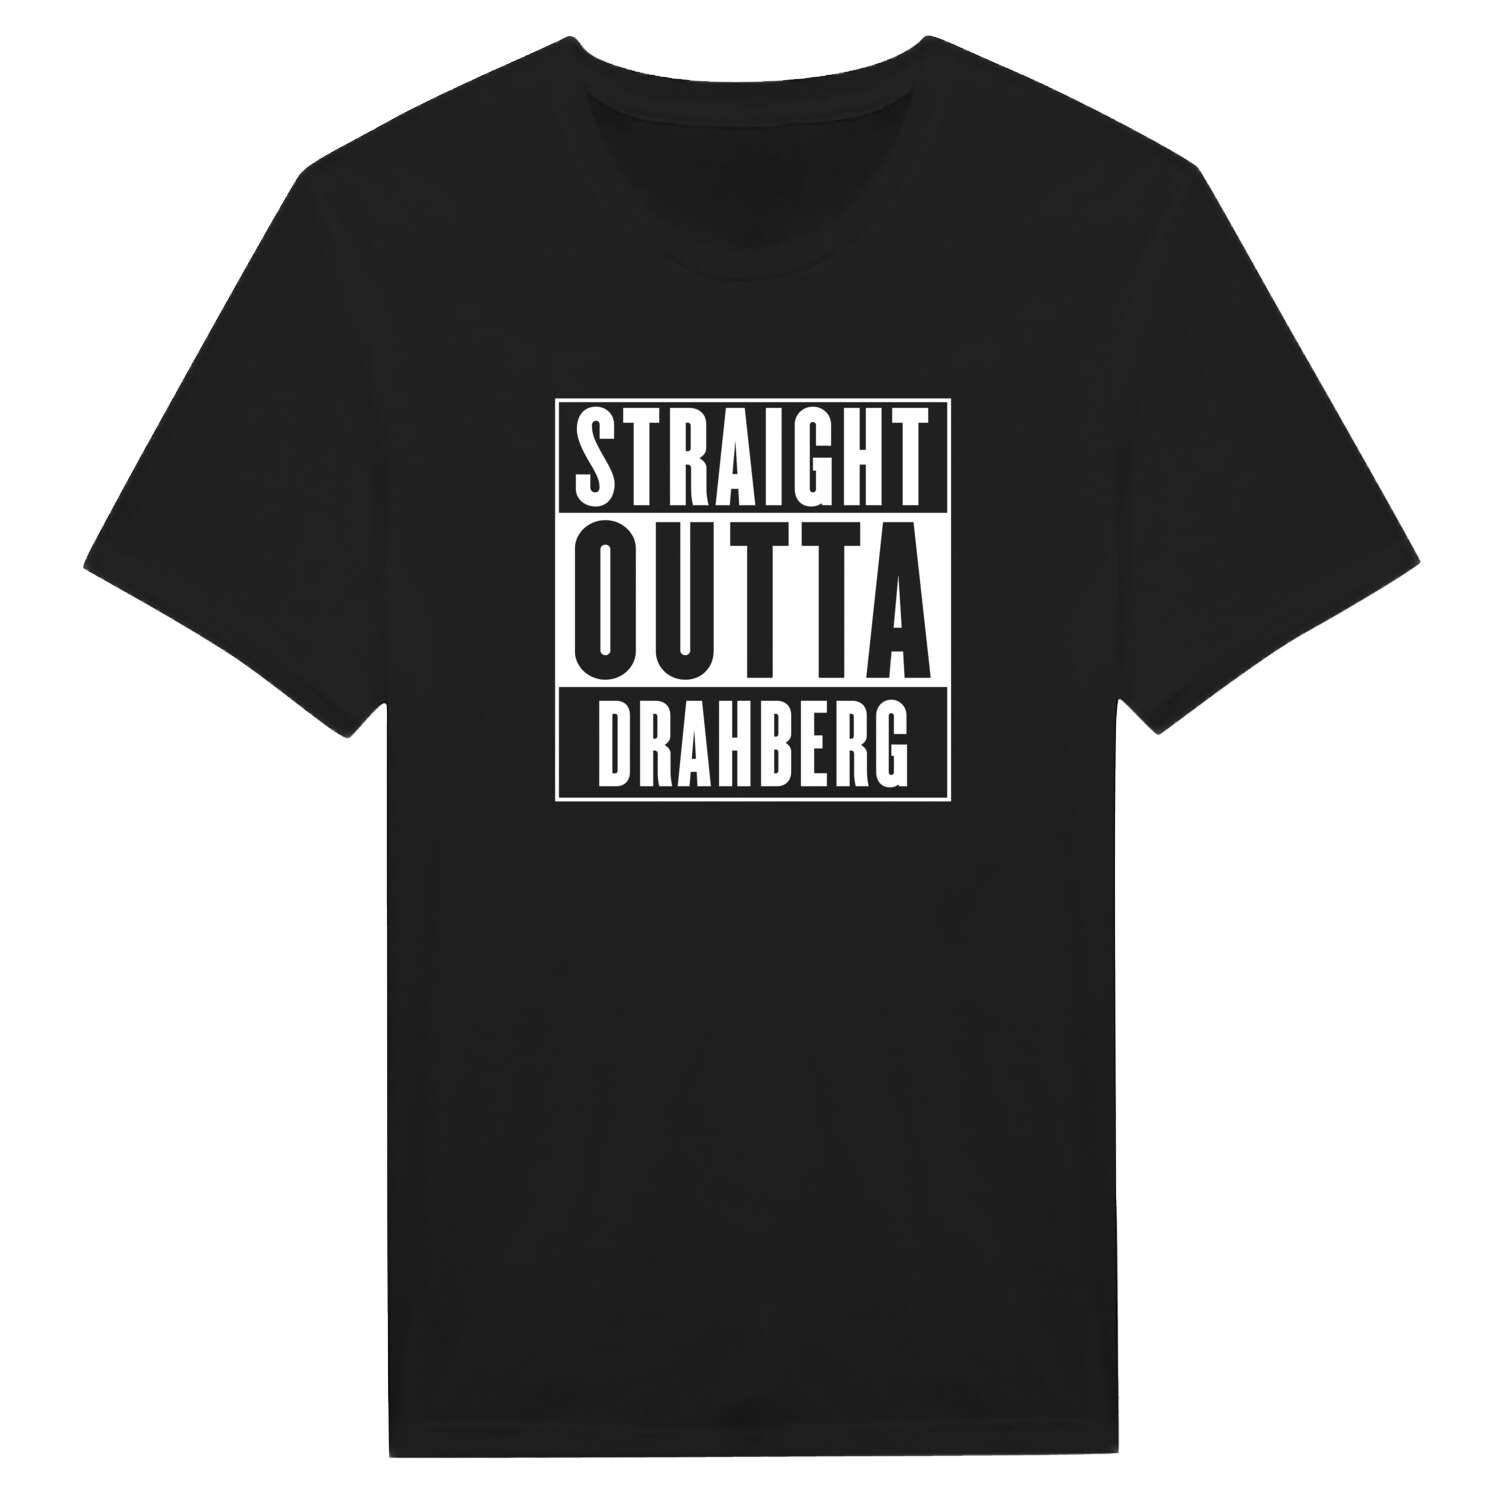 Drahberg T-Shirt »Straight Outta«